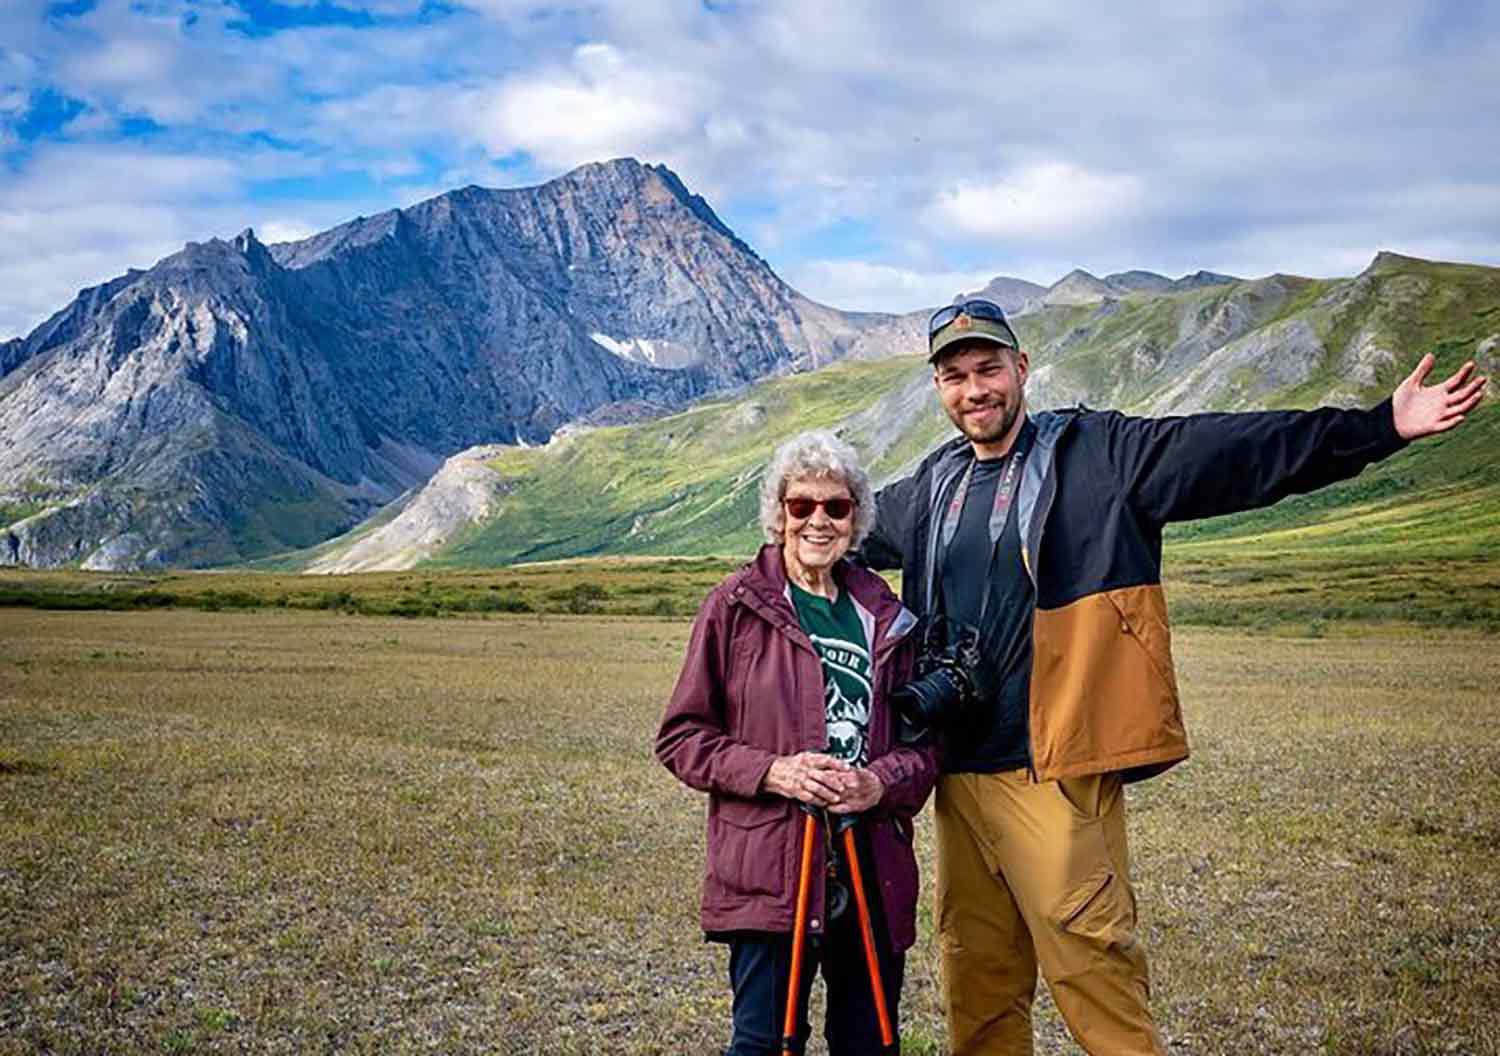 An older woman smiles and poses next to a younger man with his arms outstretched in front of mountains.